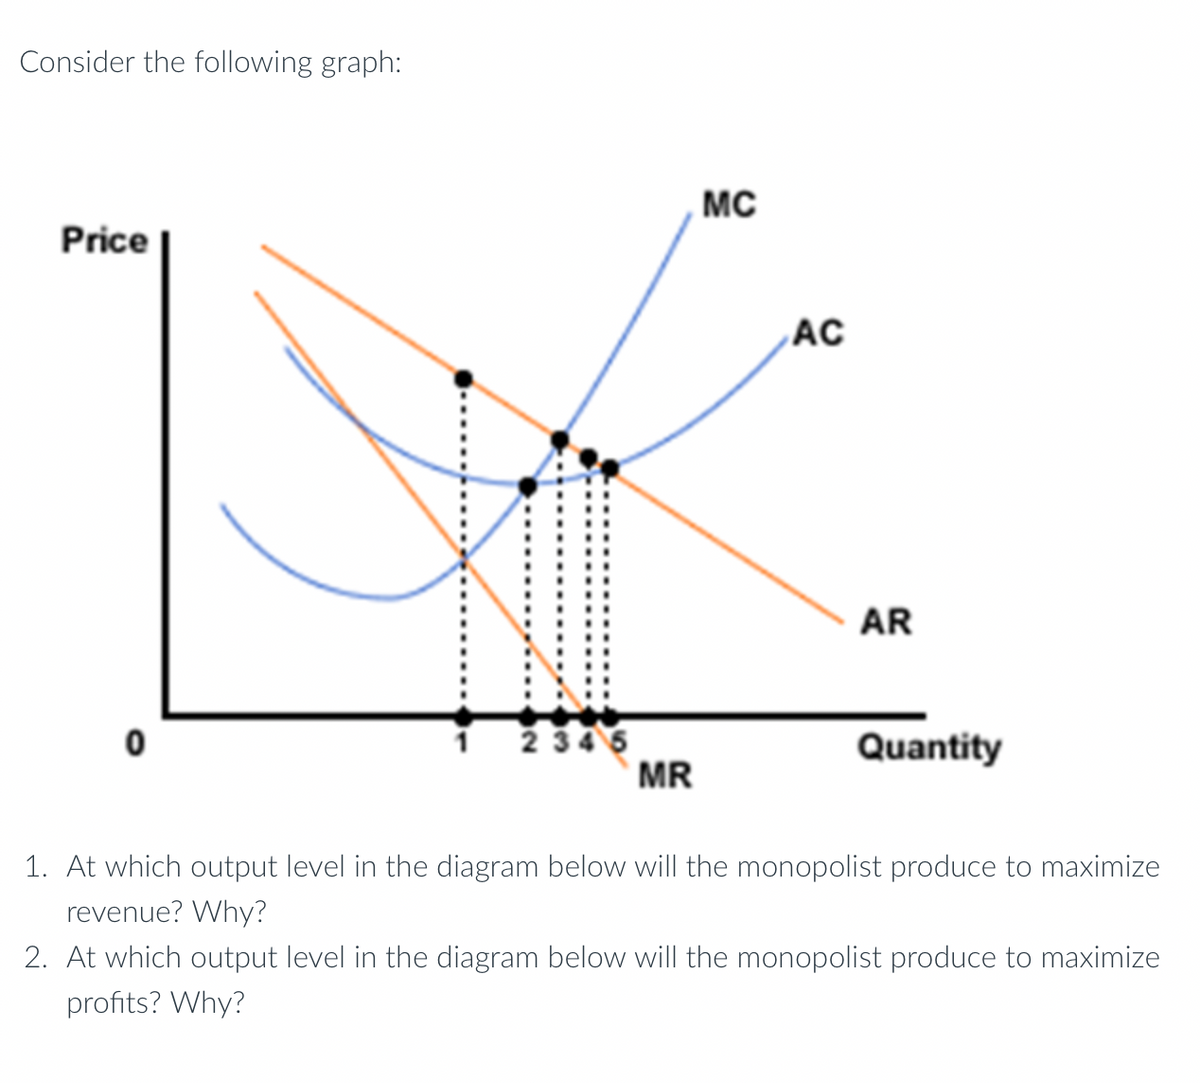 Consider the following graph:
Price
0
2345
MR
MC
AC
AR
Quantity
1. At which output level in the diagram below will the monopolist produce to maximize
revenue? Why?
2. At which output level in the diagram below will the monopolist produce to maximize
profits? Why?